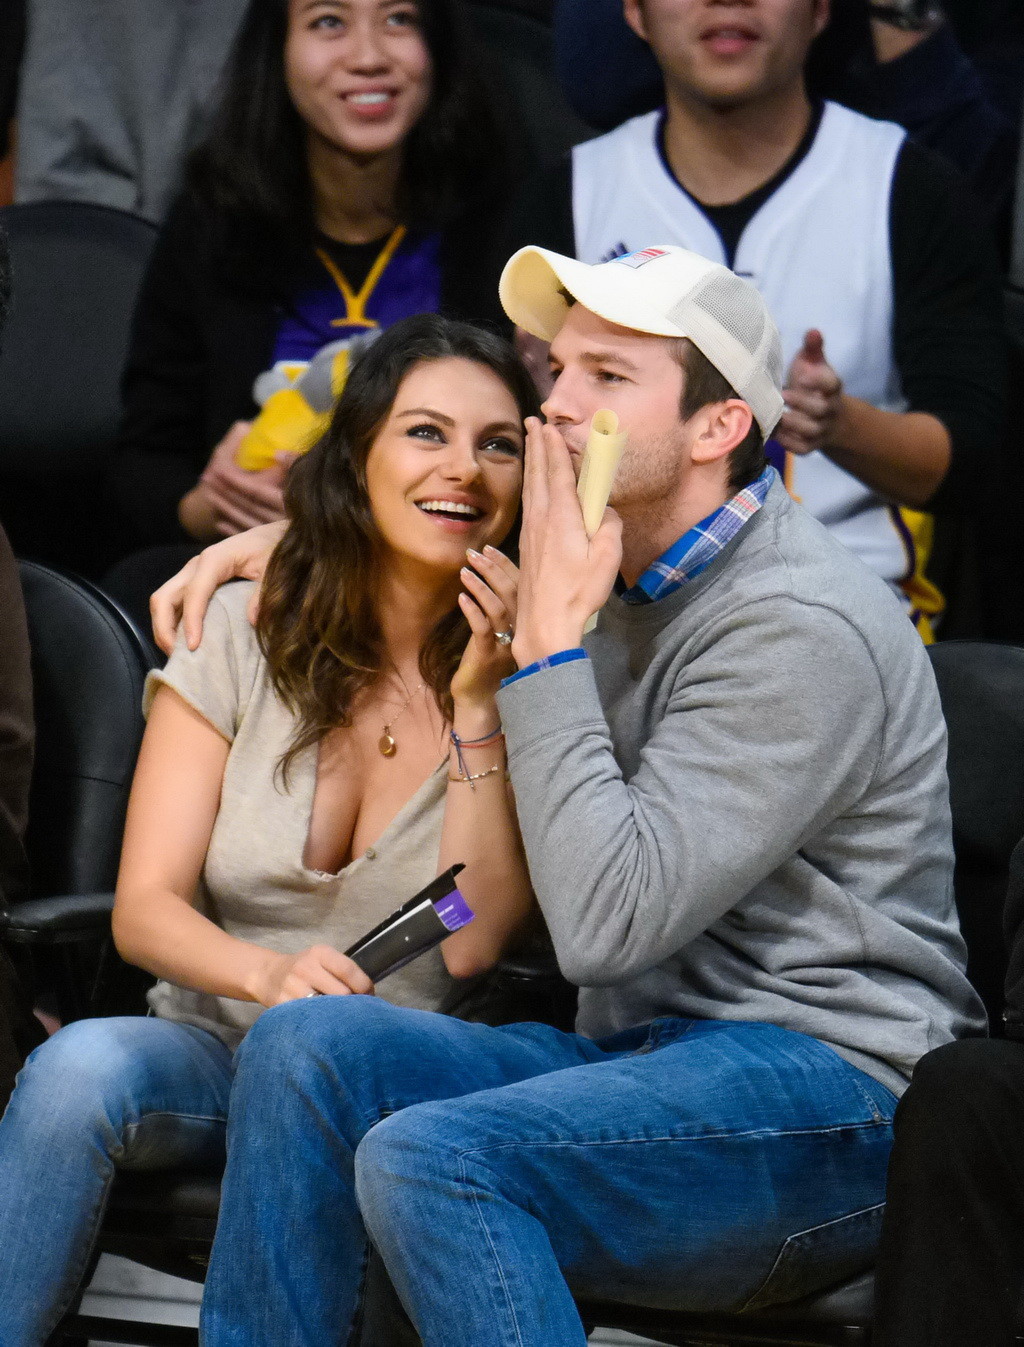 Mila Kunis busty showing huge cleavage at the LA Lakers game #75177955